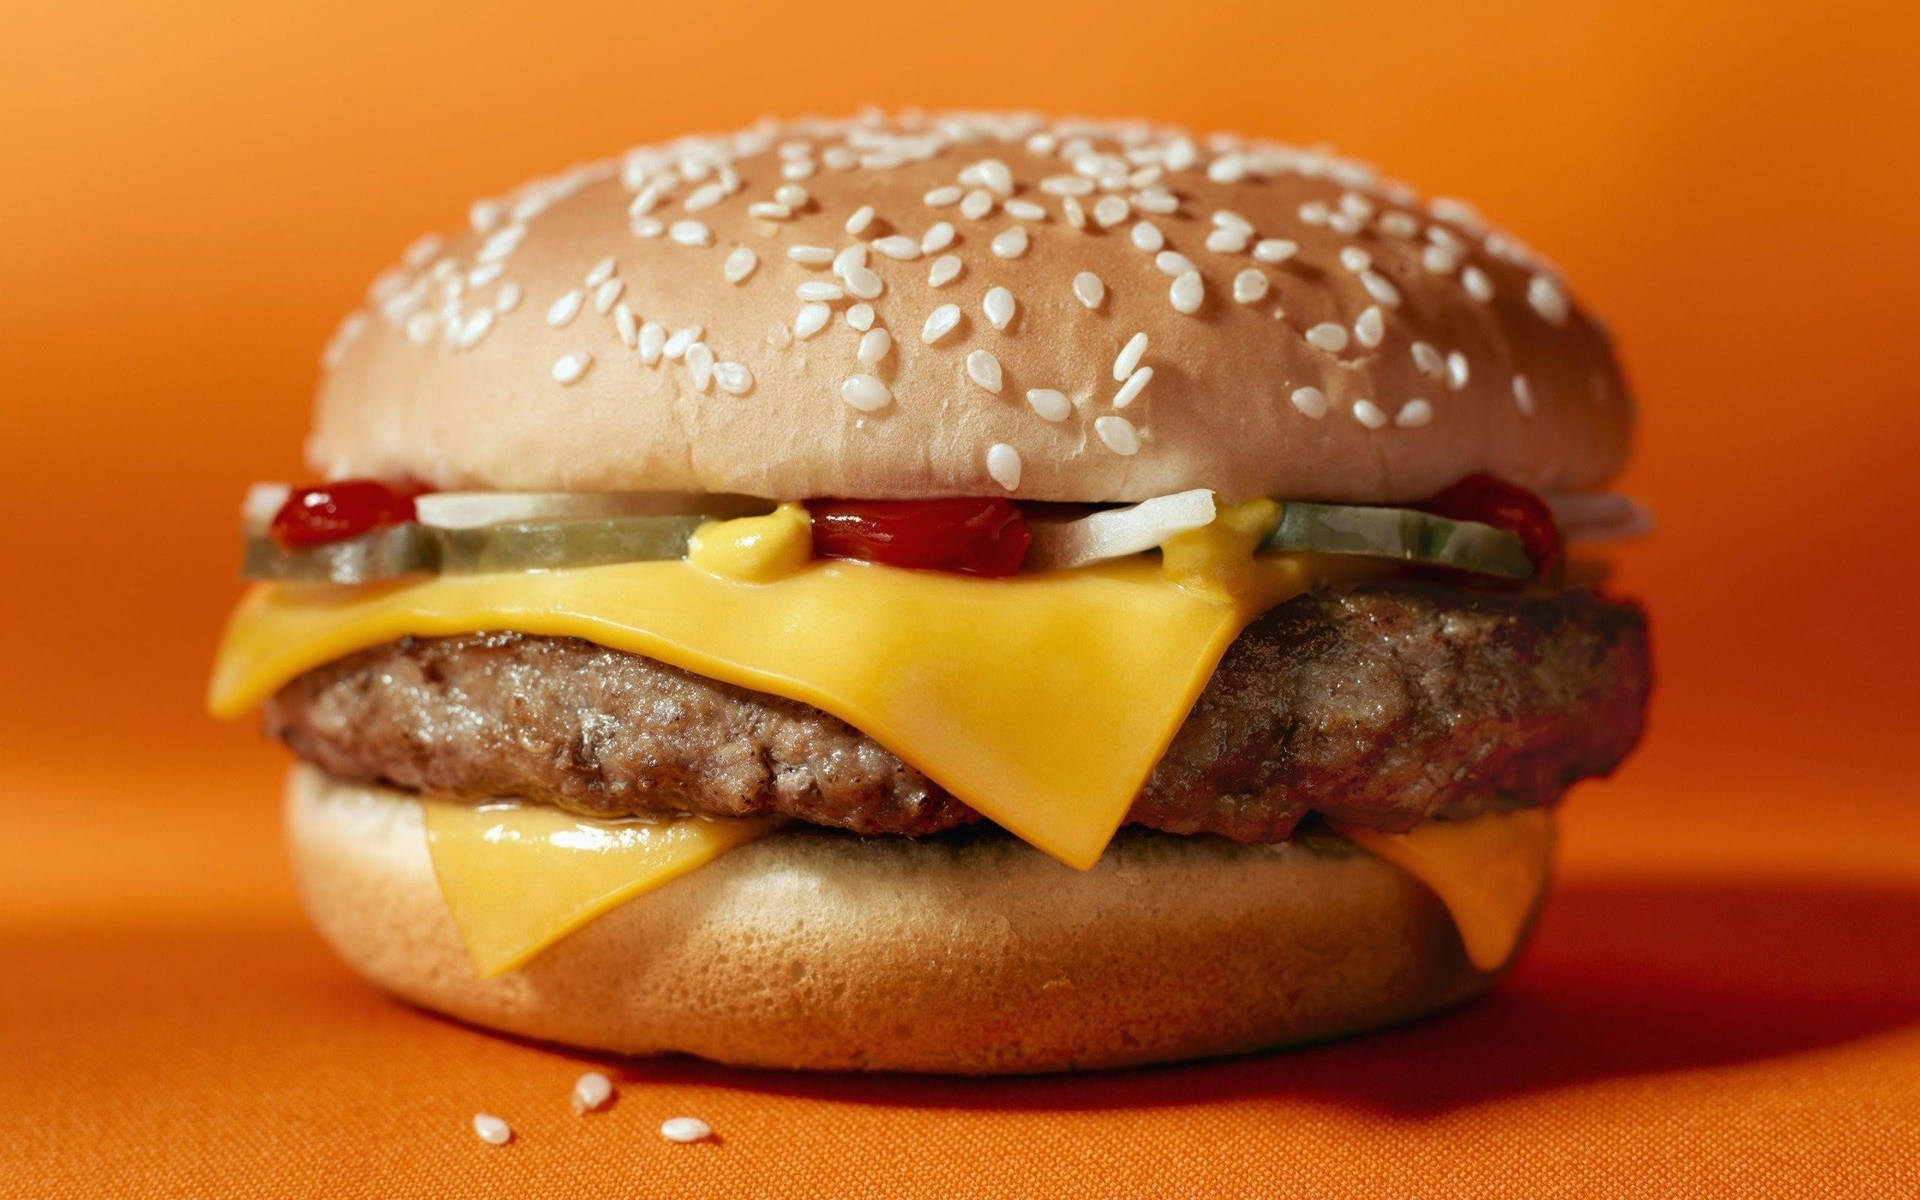 Cheesy Cheeseburger With Sesame Seeds Wallpaper